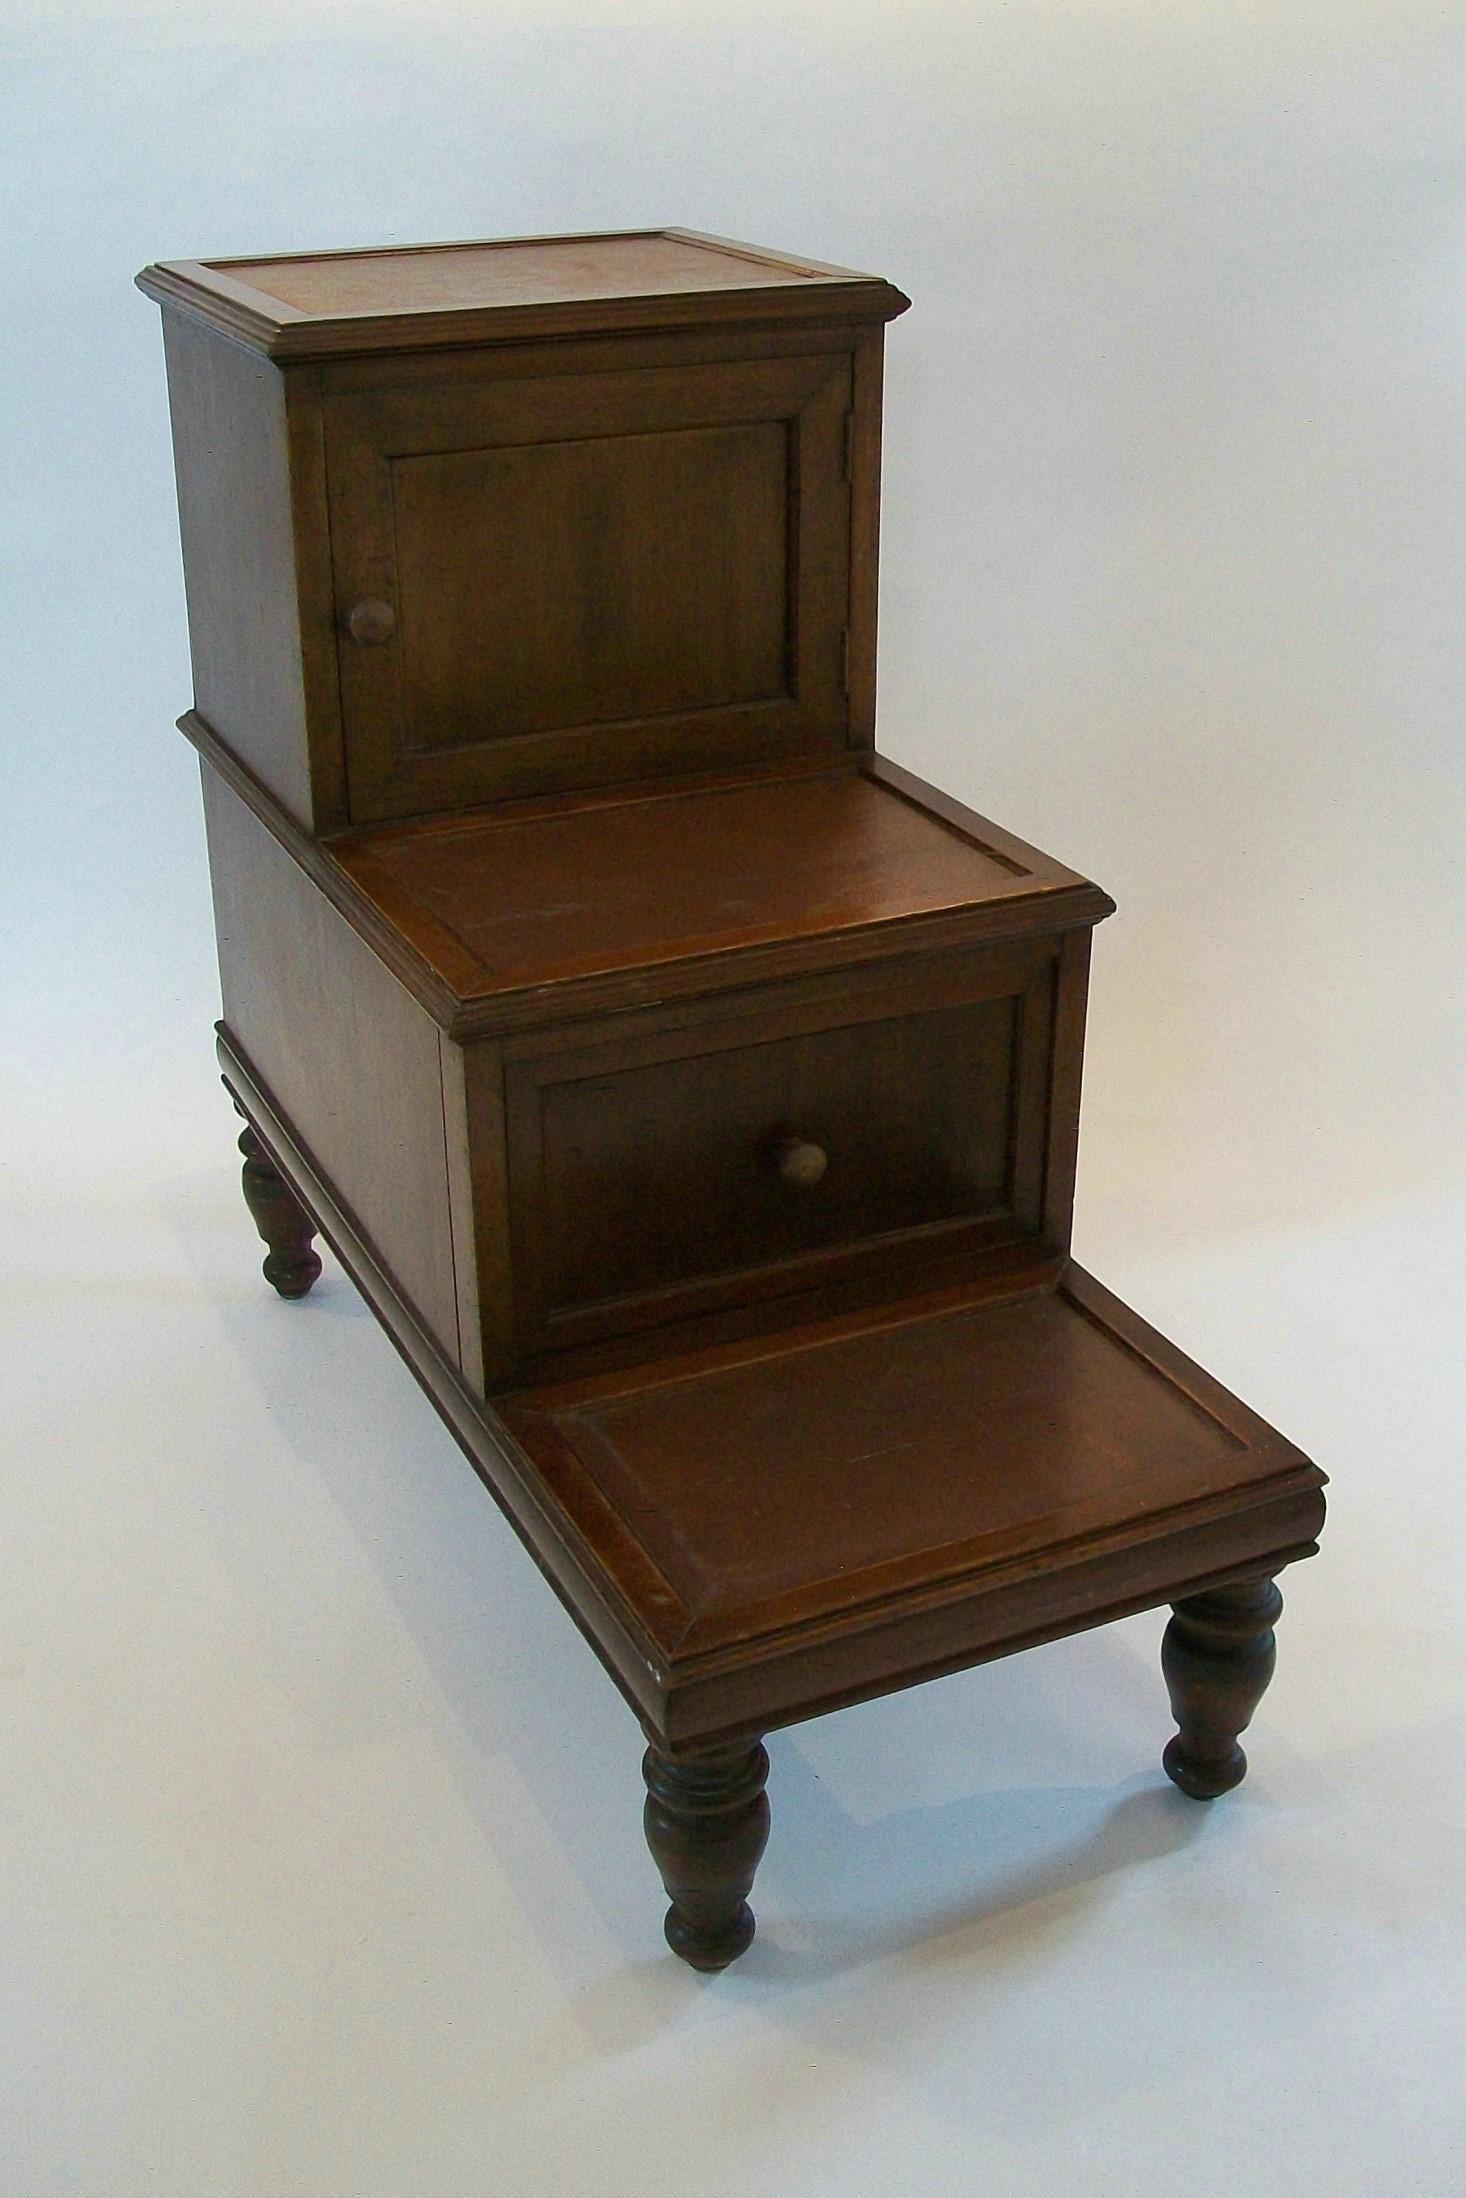 Fine Georgian (Regency Era) hardwood and leather library steps (doubles as an end table) - exceptional bench made quality with warm aged patina - featuring a solid wood frame with one cupboard and one drawer within the steps - finished with the